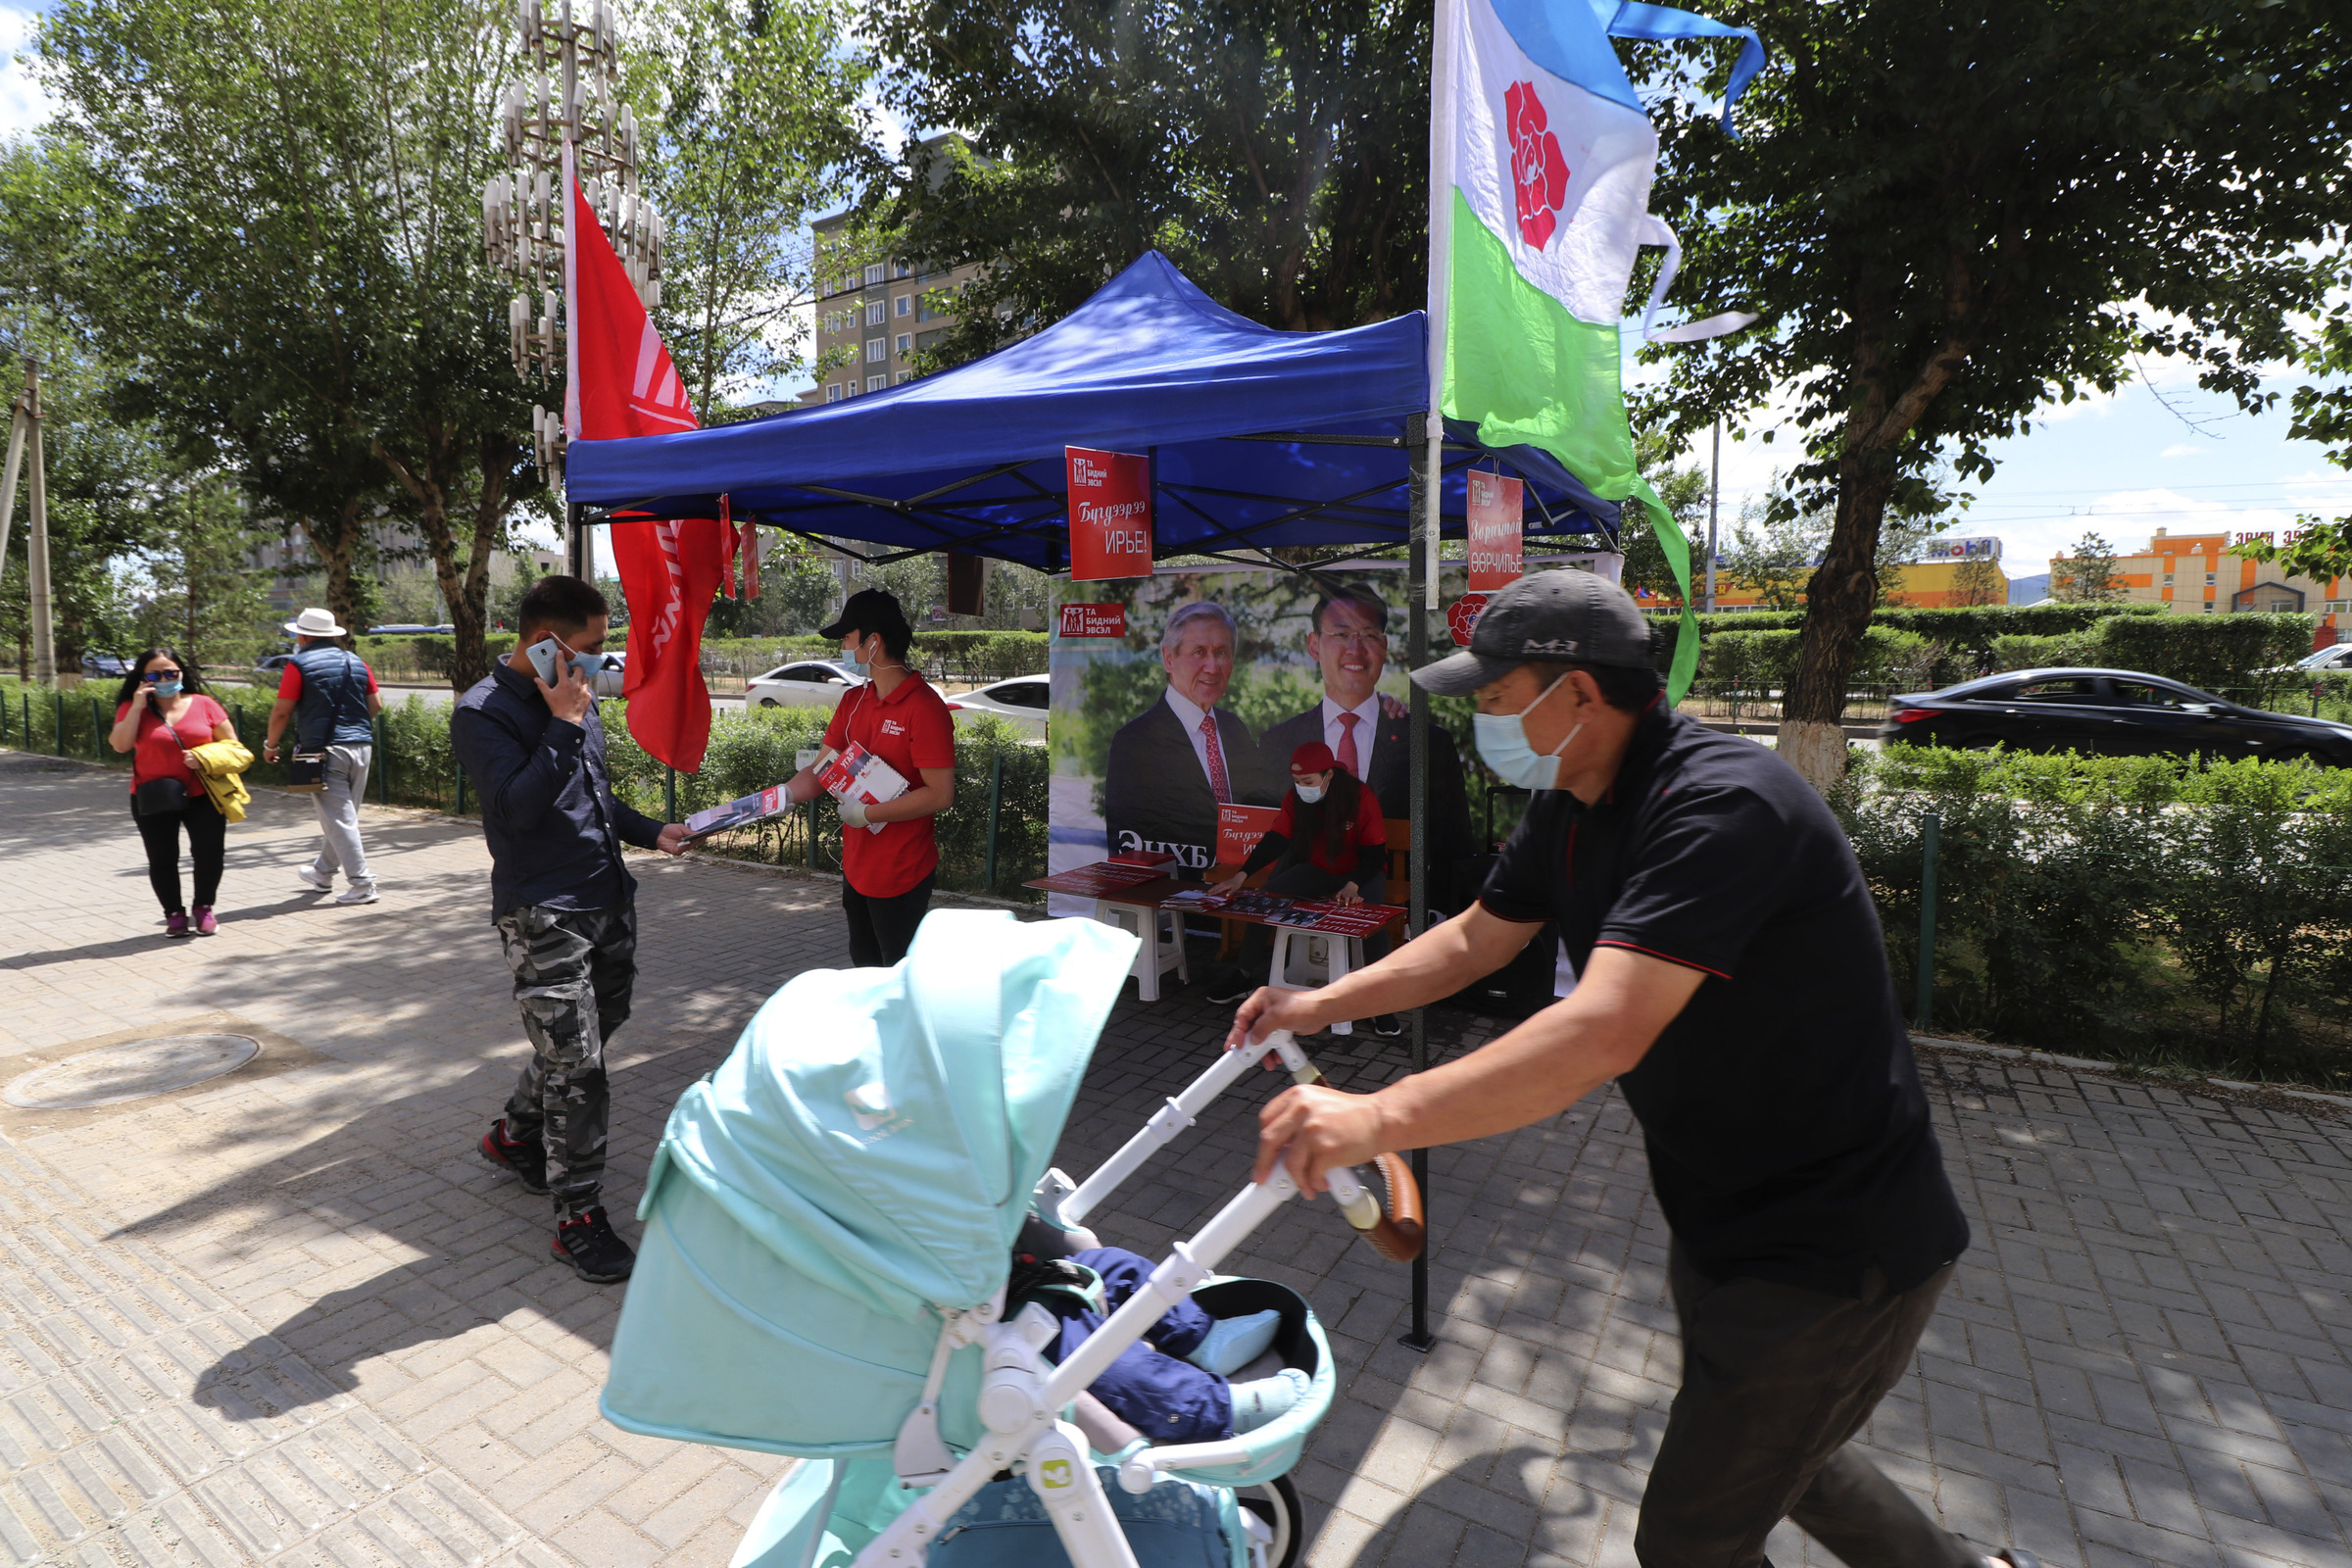 Election workers of Mongolian People's Revolutionary Party (MPRP) distribute election brochures on the downtown street of Ulaanbaatar, Mongolia, Monday, June 22, 2020. Mongolia holds parliamentary elections on Wednesday, continuing a nearly 30-year democratic system in a vast but lightly populated country sandwiched between authoritarian regimes in Russia and China and beset by economic problems. (AP Photo/Ganbat Namjilsangarav)